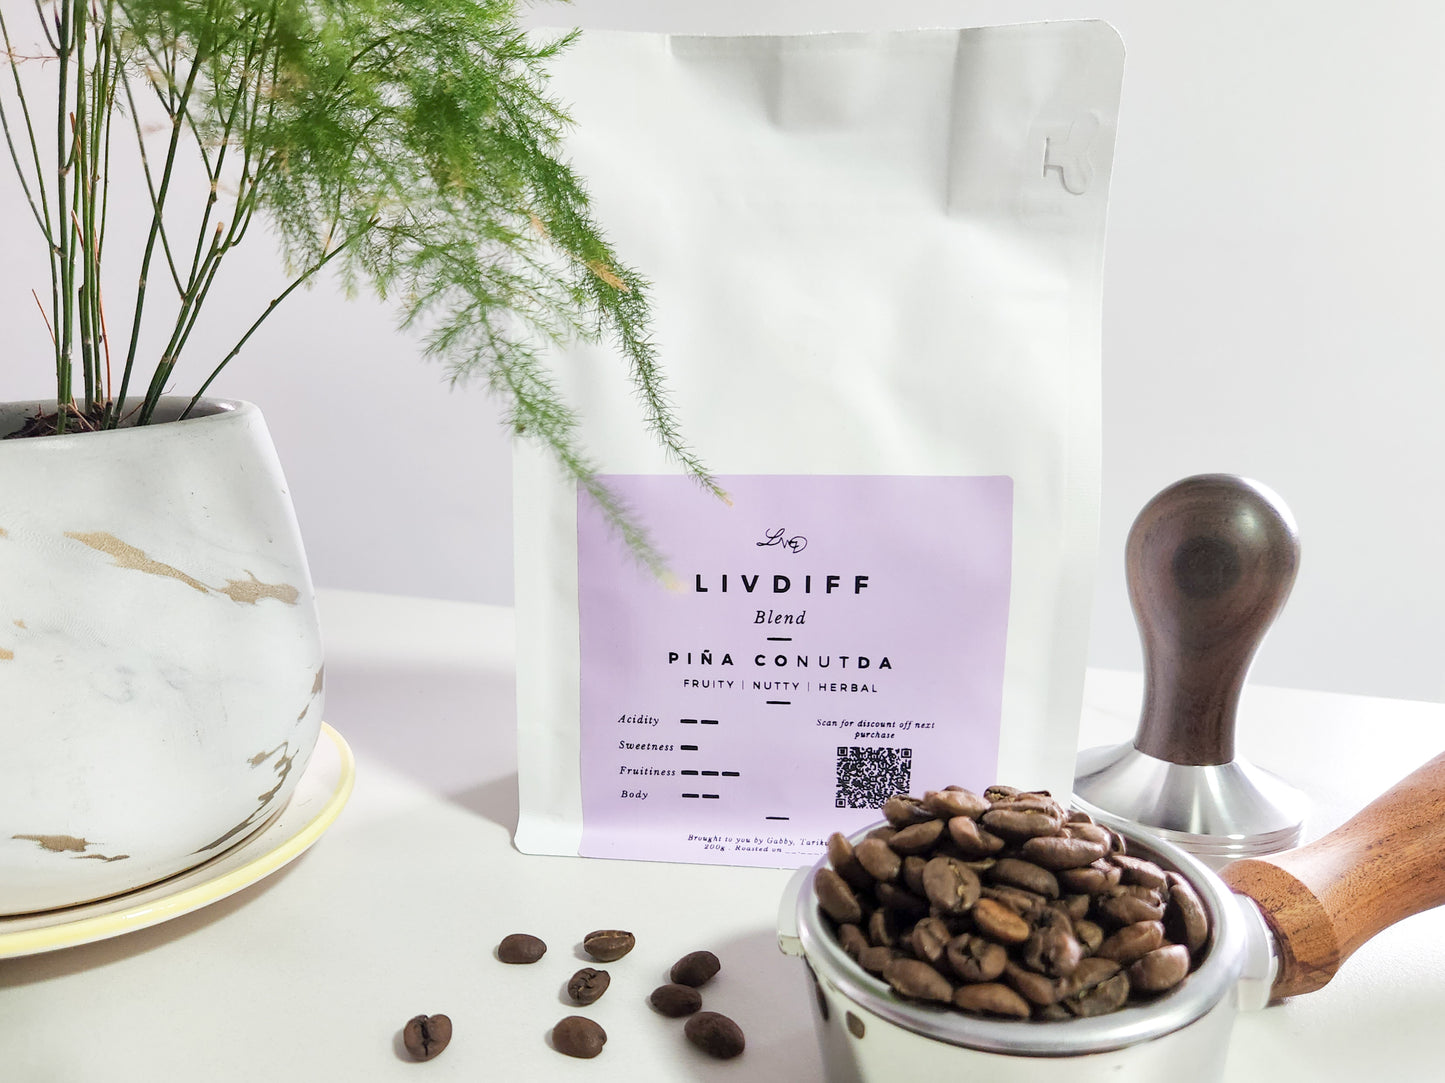 Freshly Roasted Specialty Coffee Blend by LivDiff. Fruity, Nutty and Herbal flavour profile